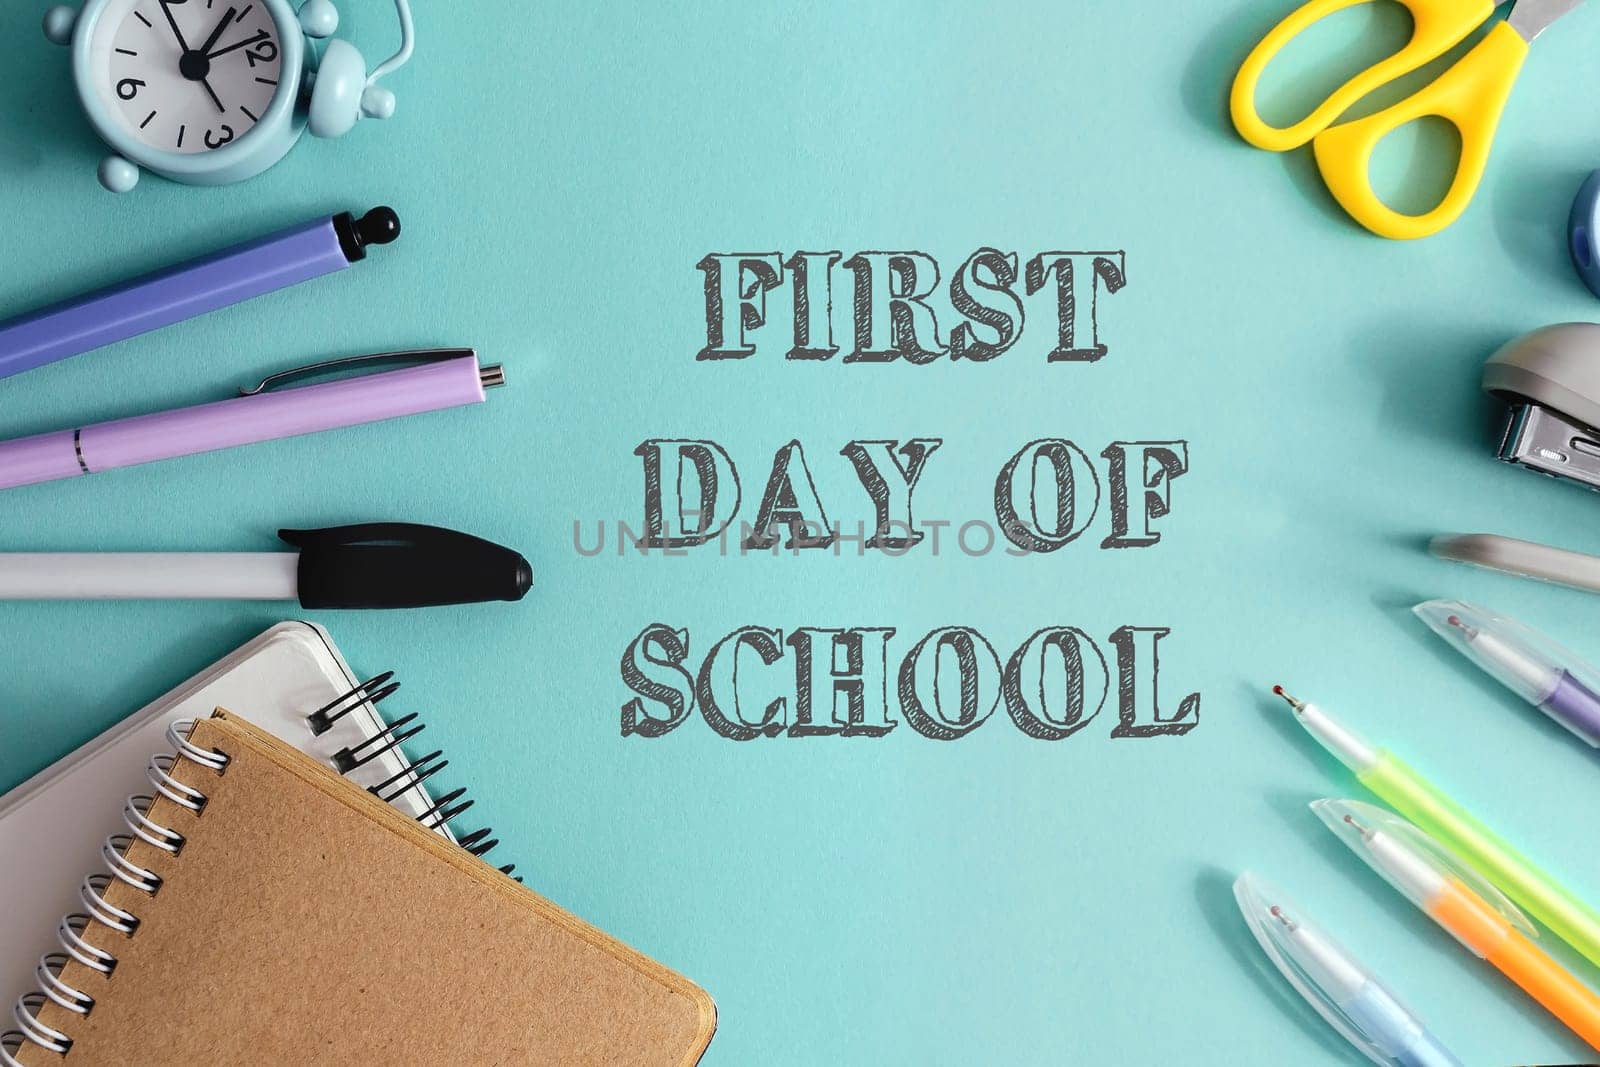 A blue background with a clock, scissors, pens, and pencils. The words first day of school are written in white